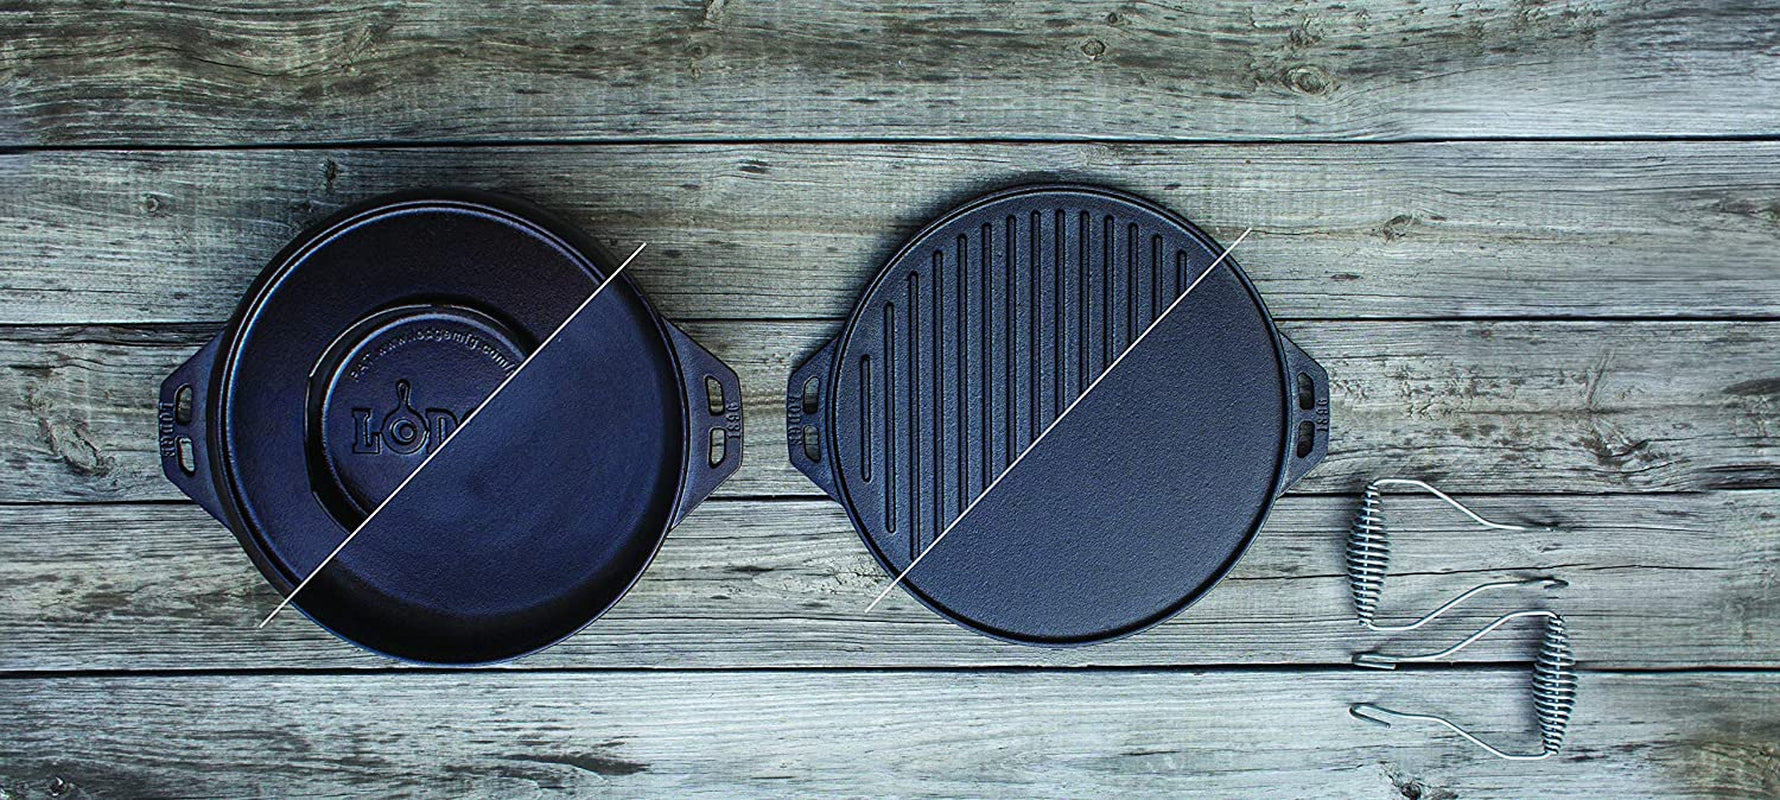 Lodge Cast Iron Cook-It-All Kit. Five-Piece Cast Iron Set Includes a Reversible Grill/Griddle 14 Inch, 6.8 Quart Bottom/Wok, Two Heavy Duty Handles, and a Tips & Tricks Booklet.